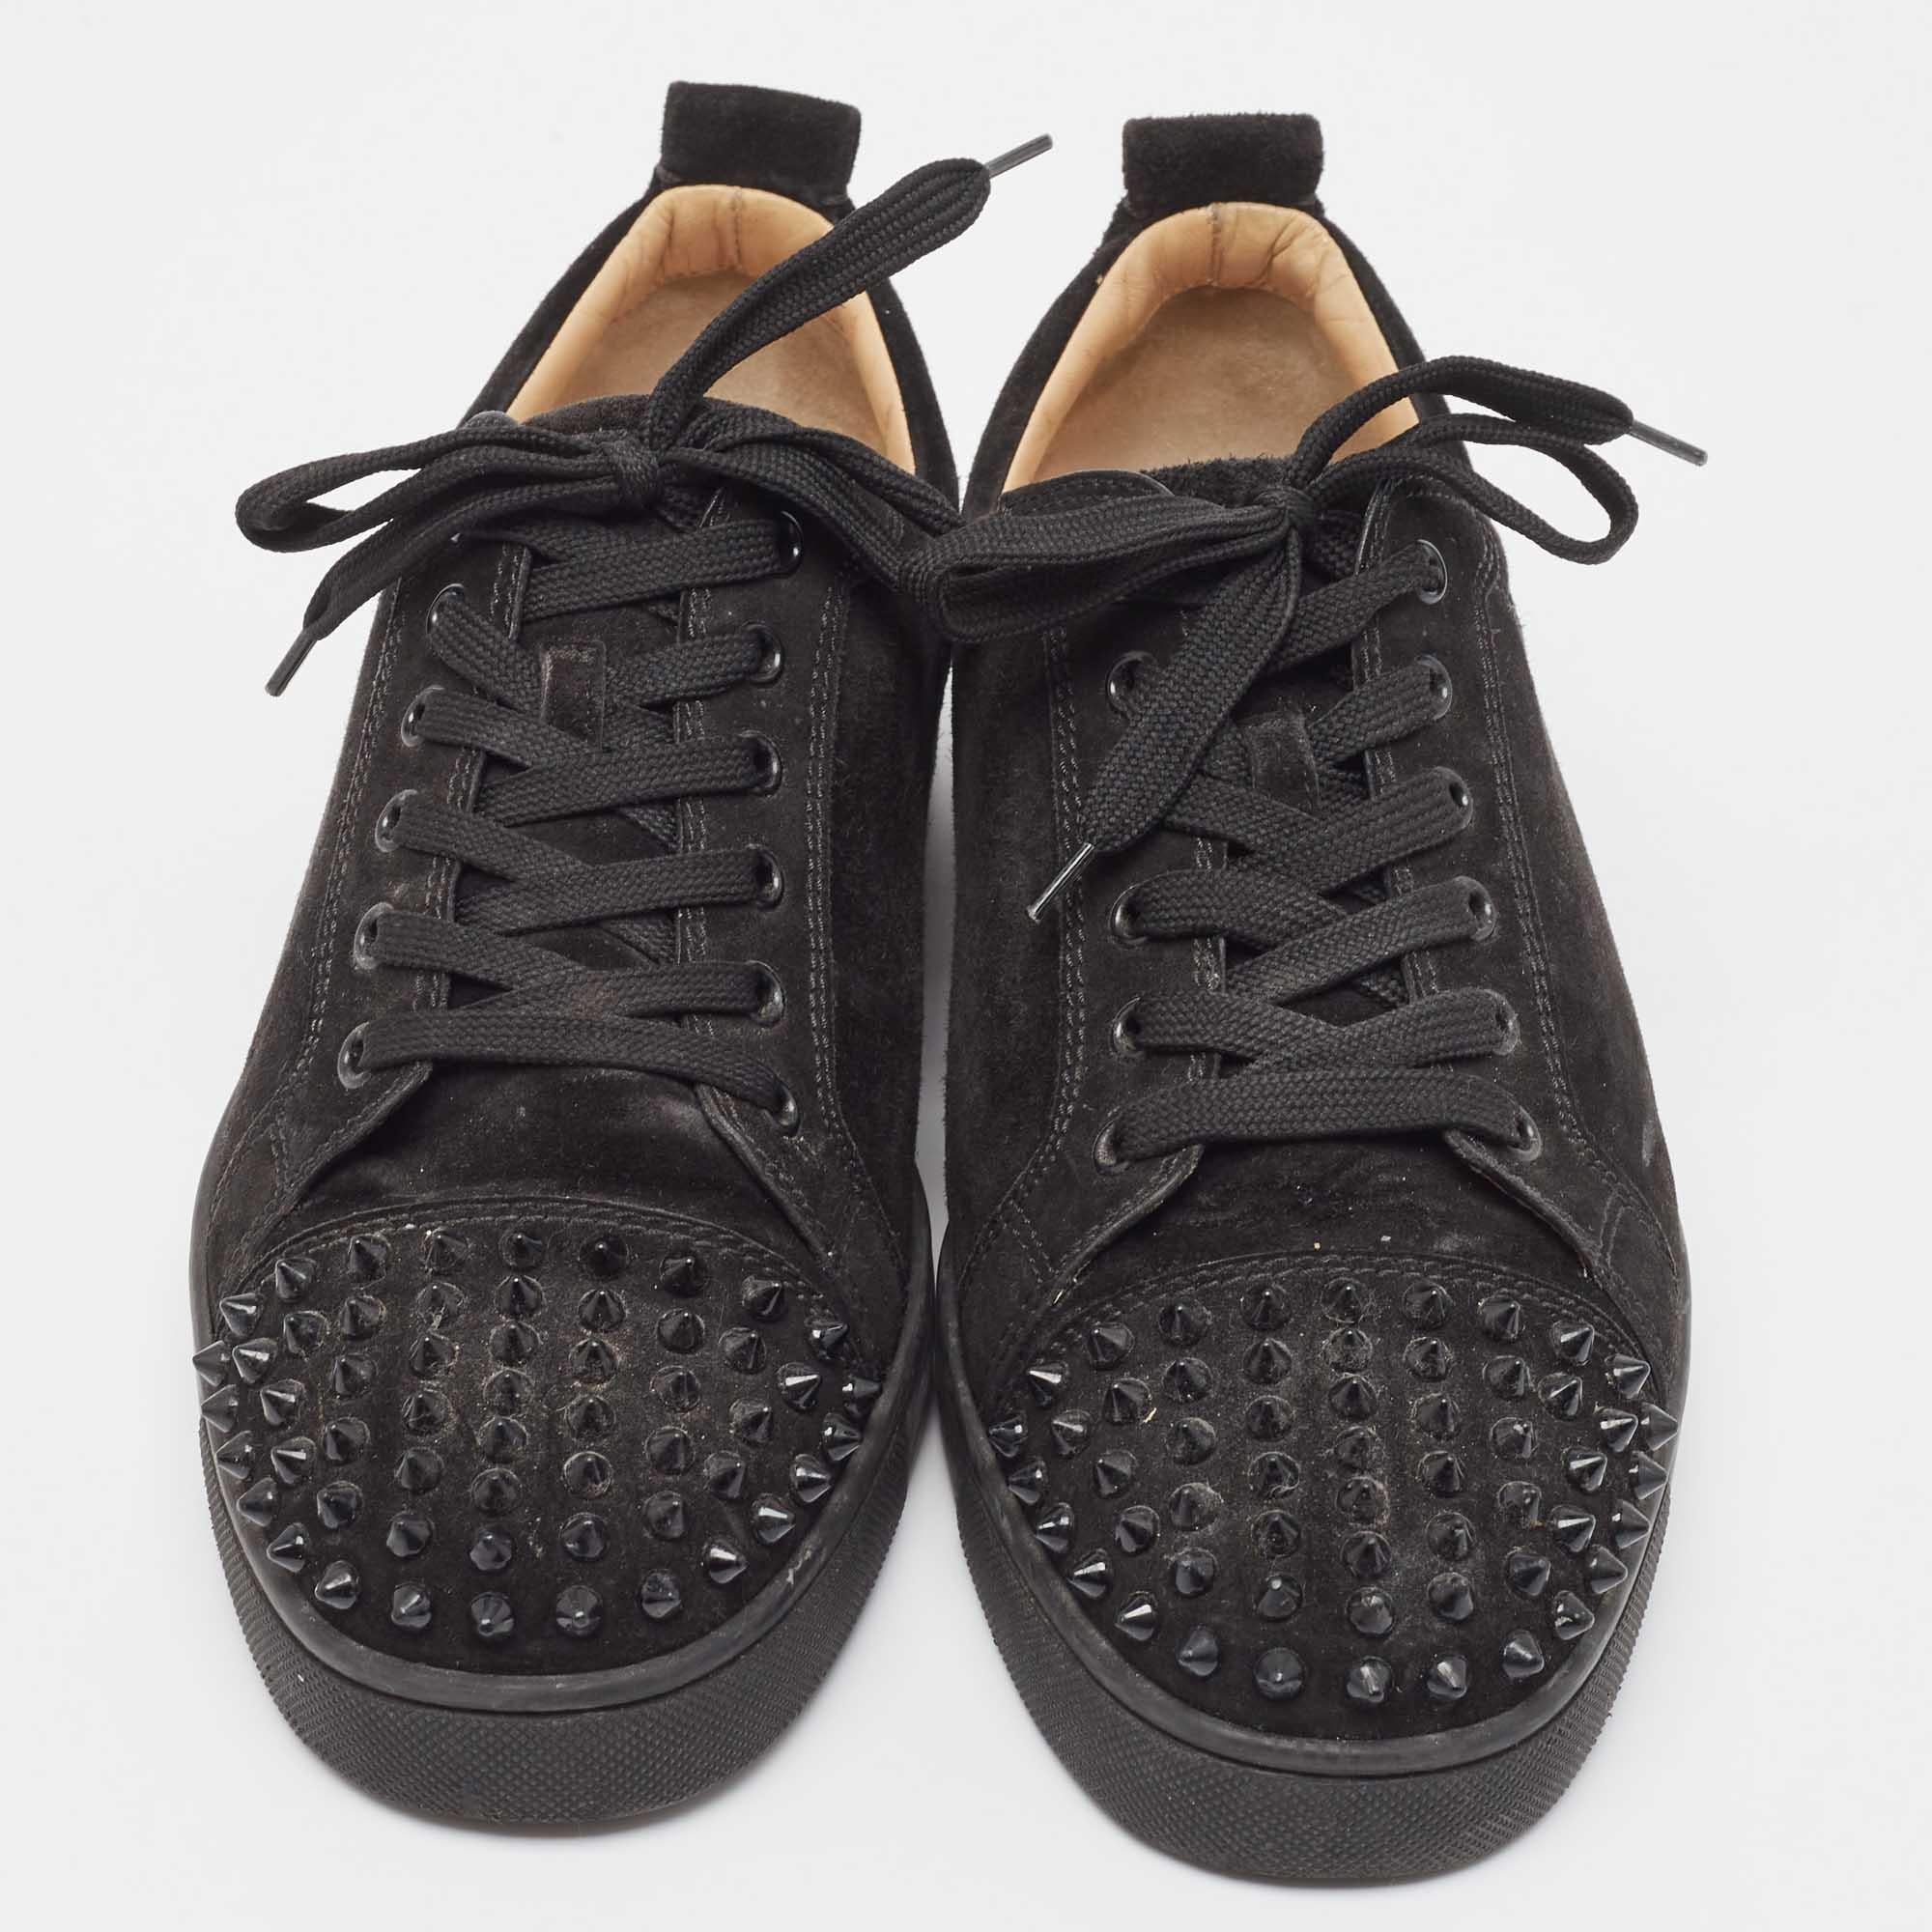 Add a statement appeal to your outfit with these Christian Louboutin sneakers. Made from premium materials, they feature lace-up vamps, spike details, and relaxing footbeds. The rubber sole of this pair aims to provide you with everyday